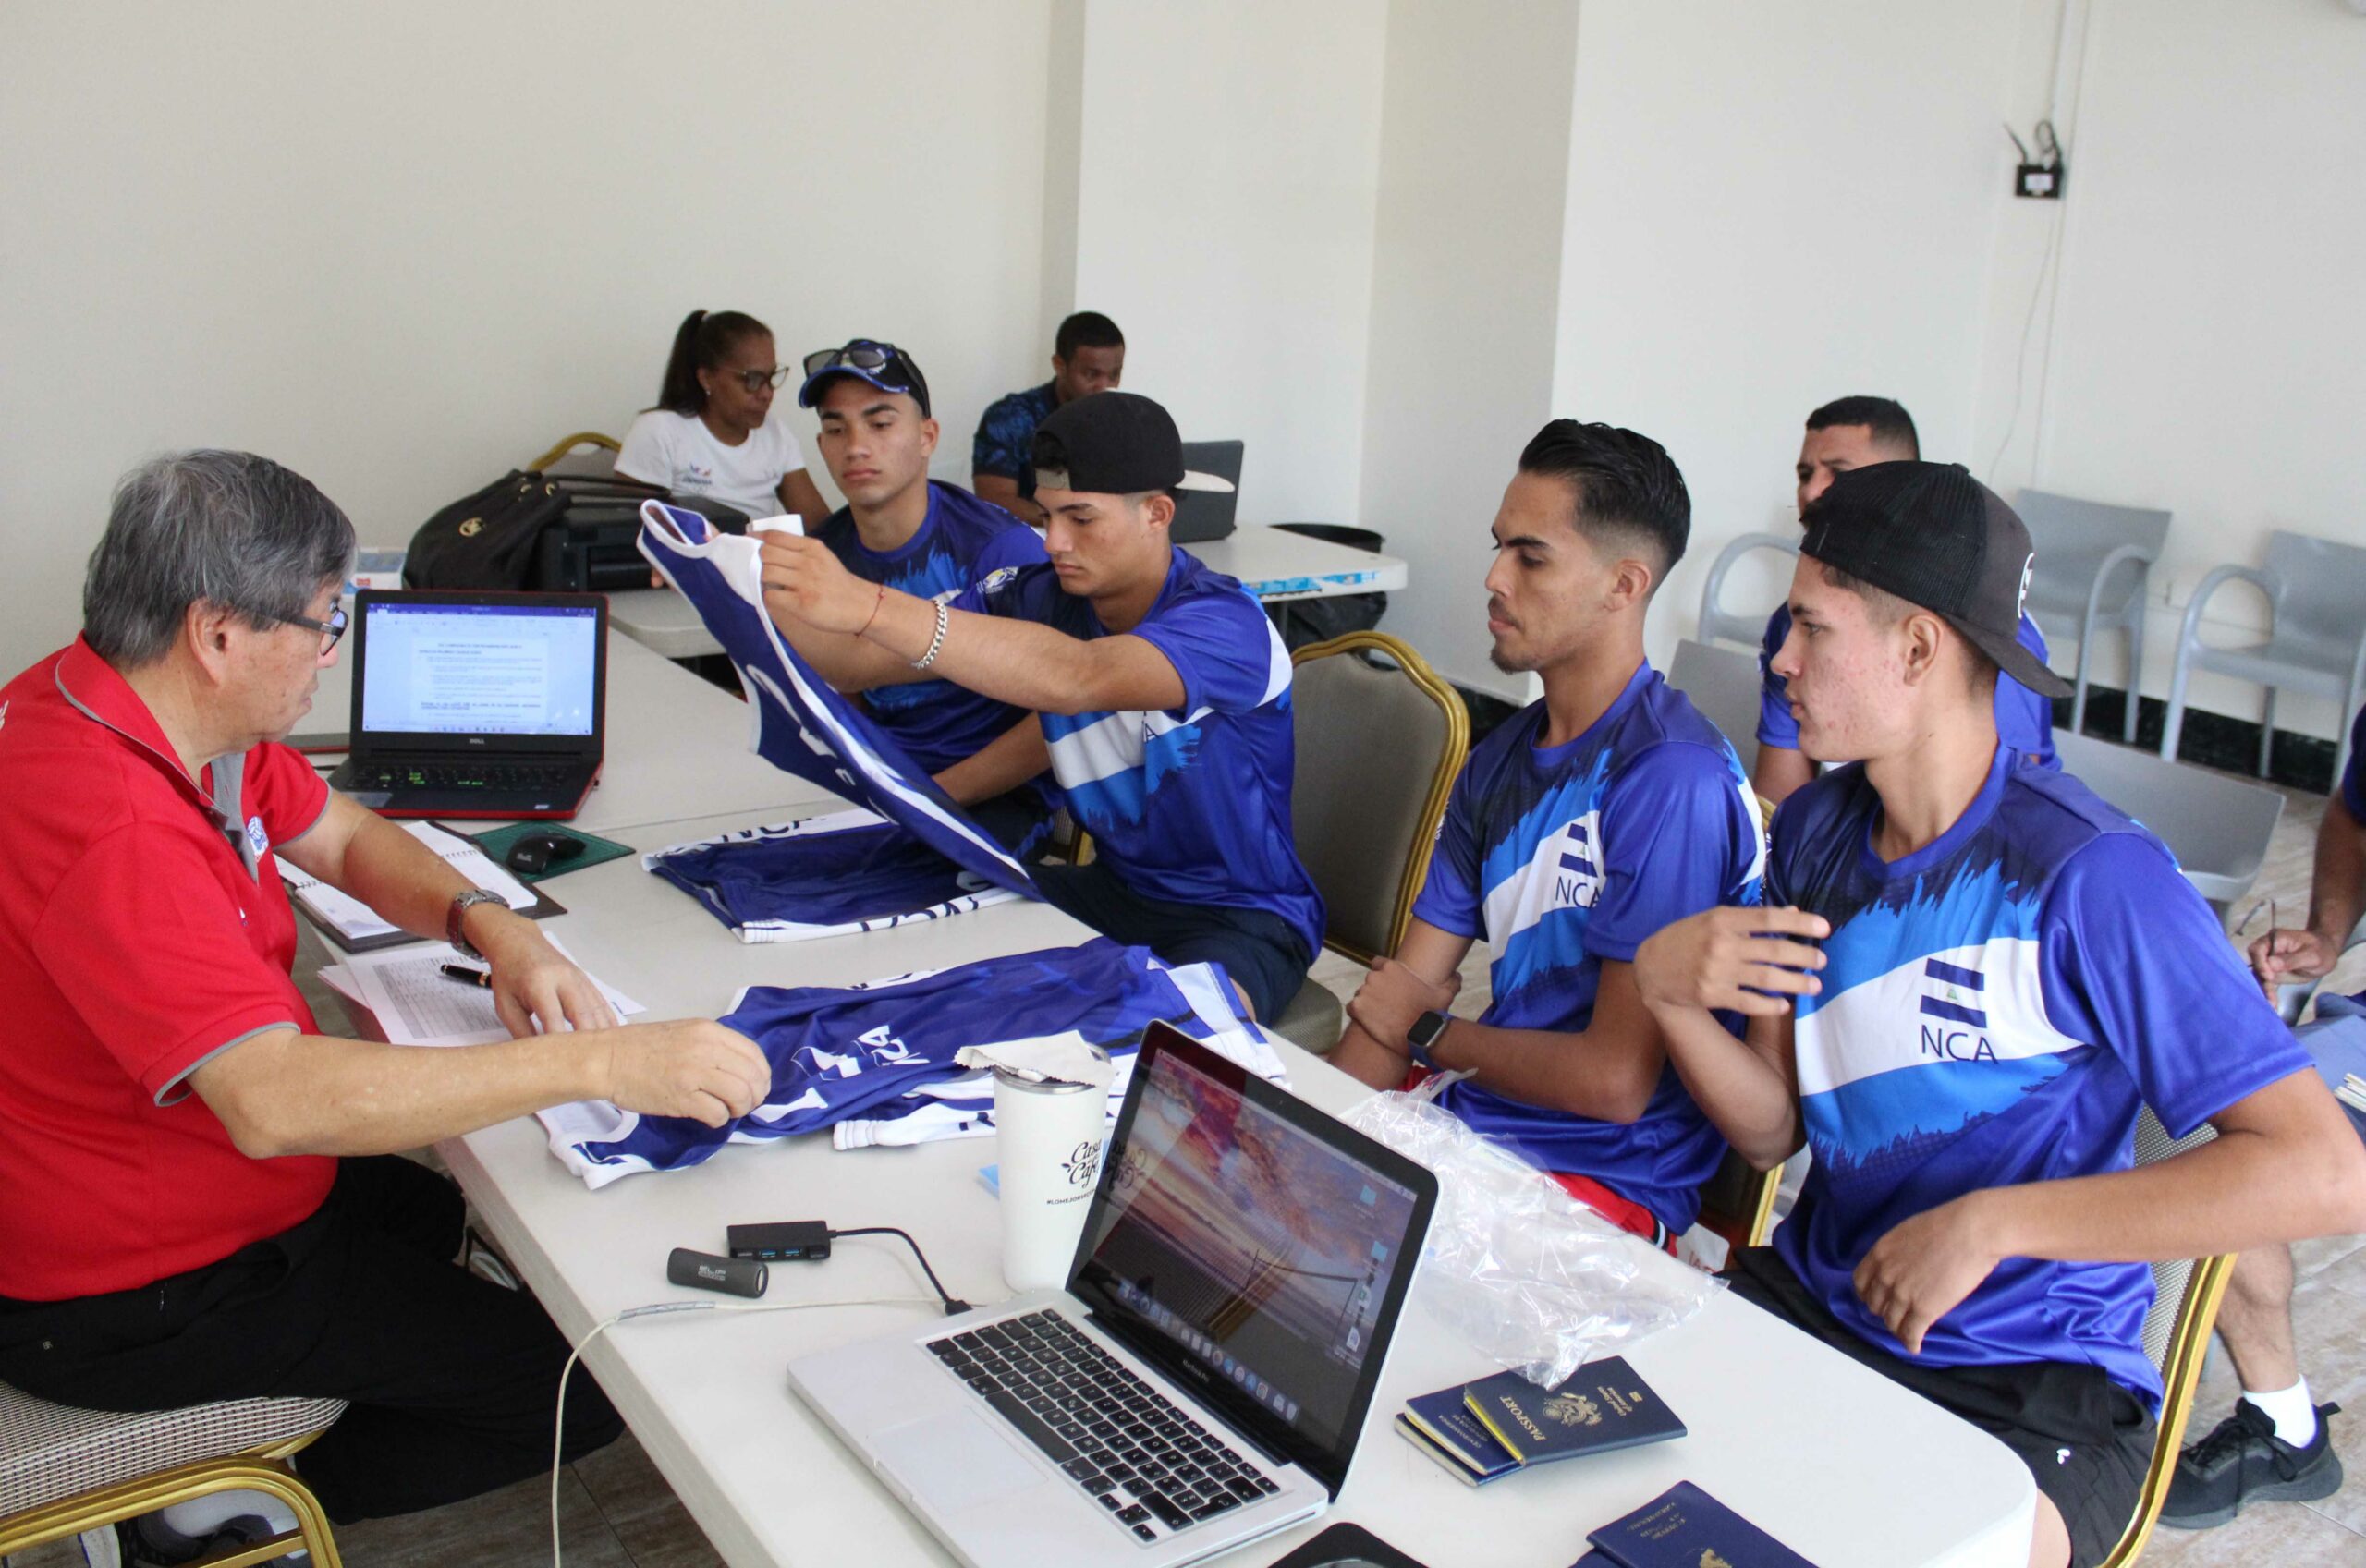 Nicaragua men will face a great challenge at AFECAVOL U-21 Beach